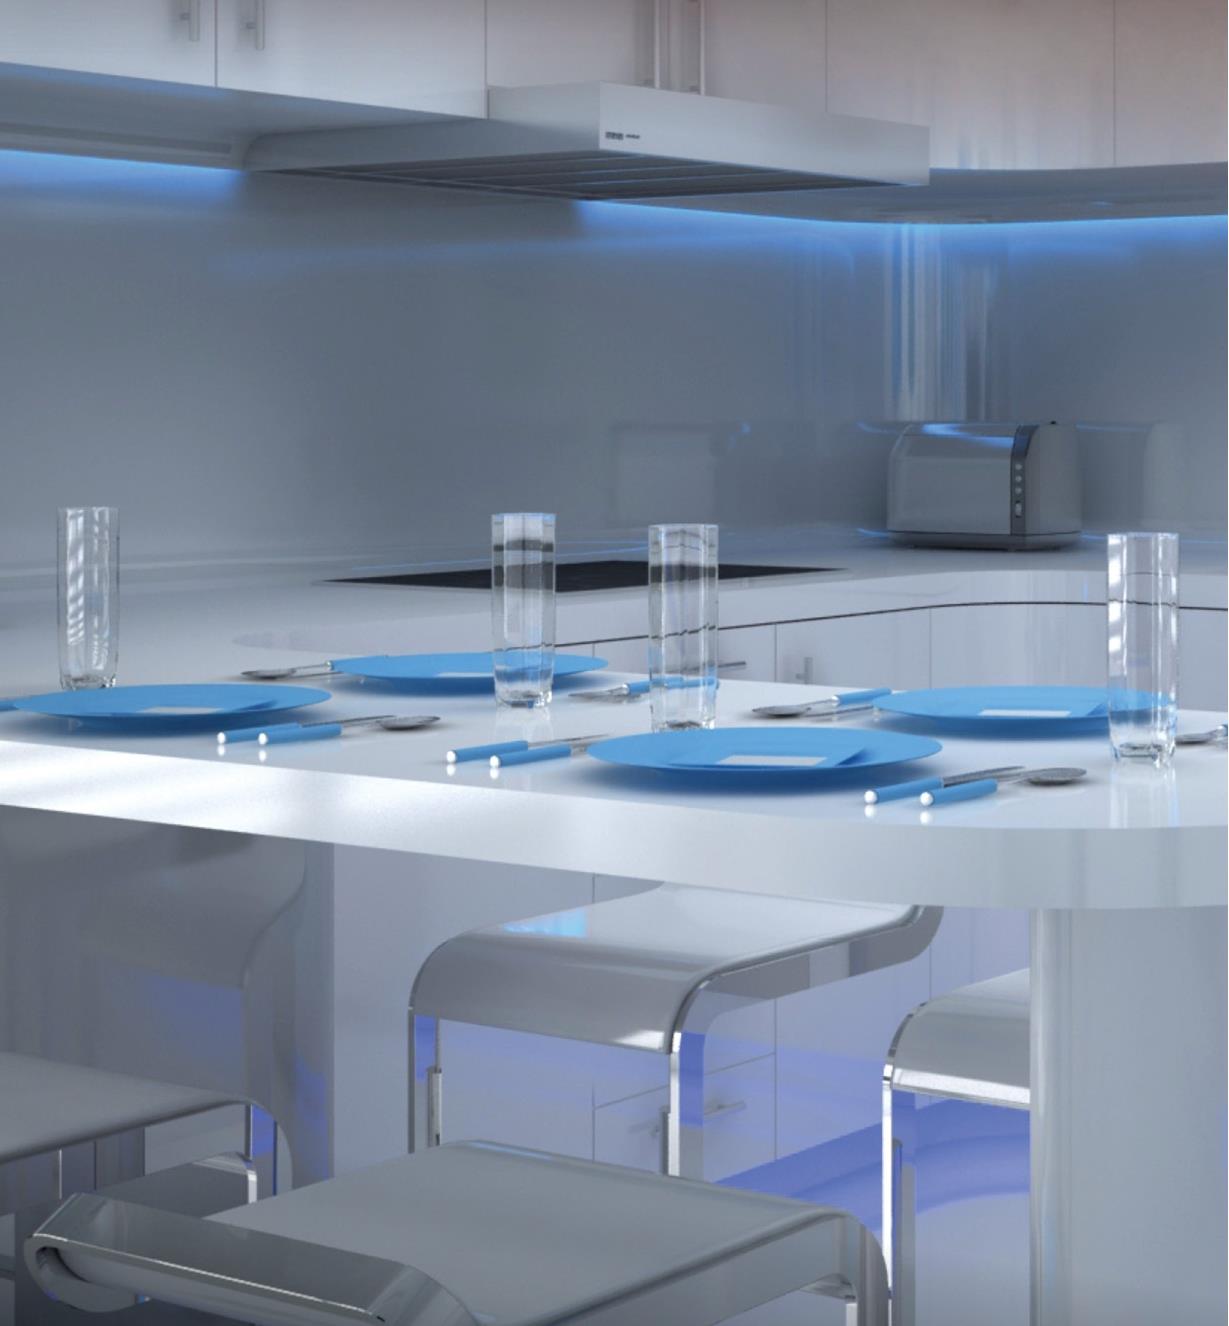 A kitchen with blue lighting under the upper cabinets